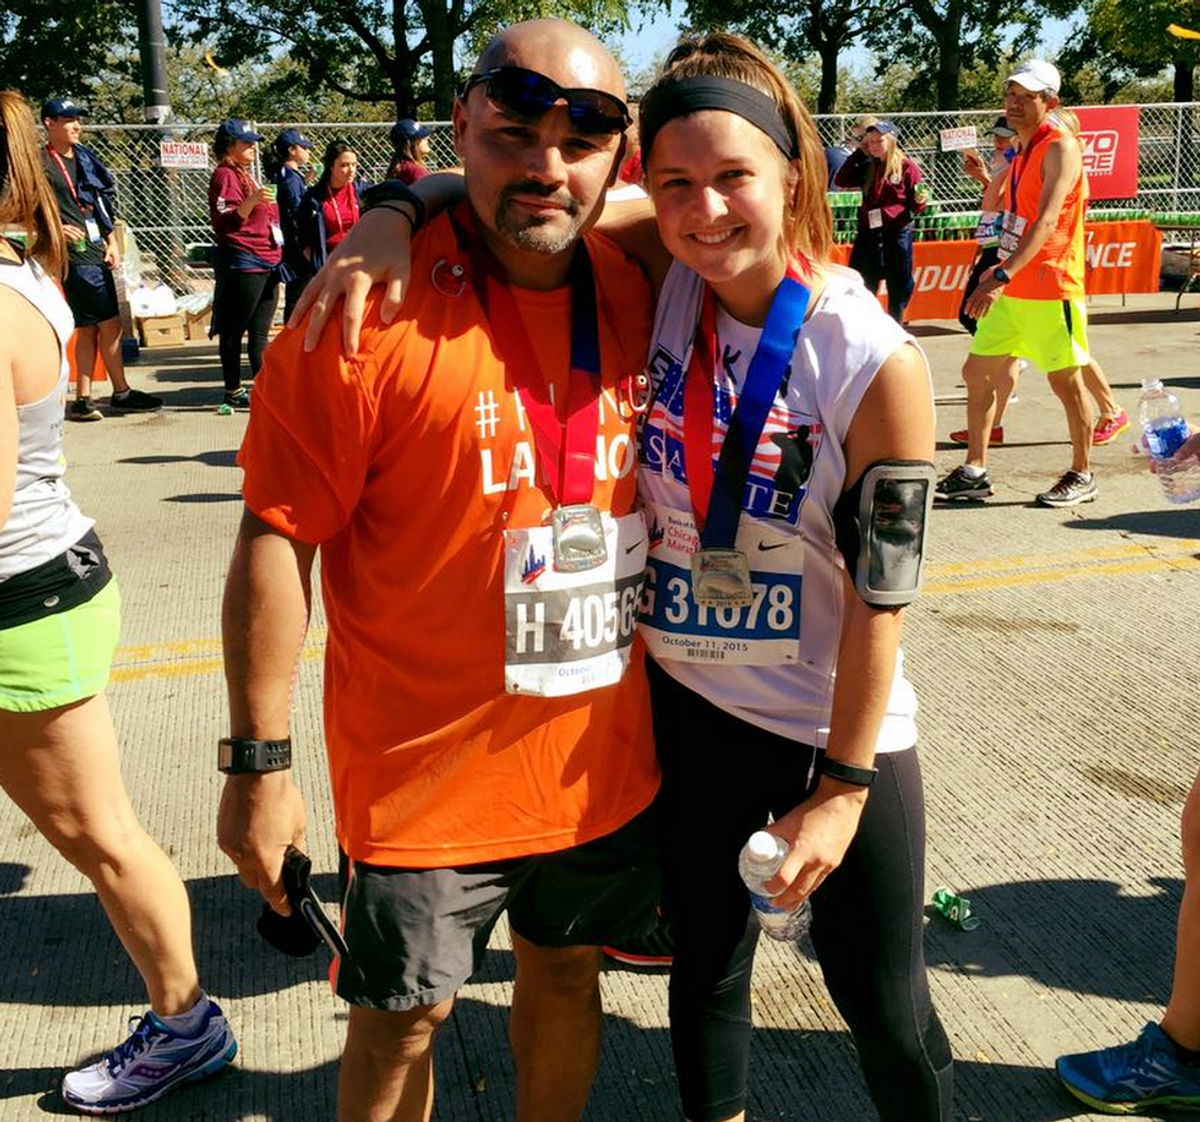 Help This Marathon Runner Find The Army Veteran Who Saved Her Through An Amazing Act Of Kindness